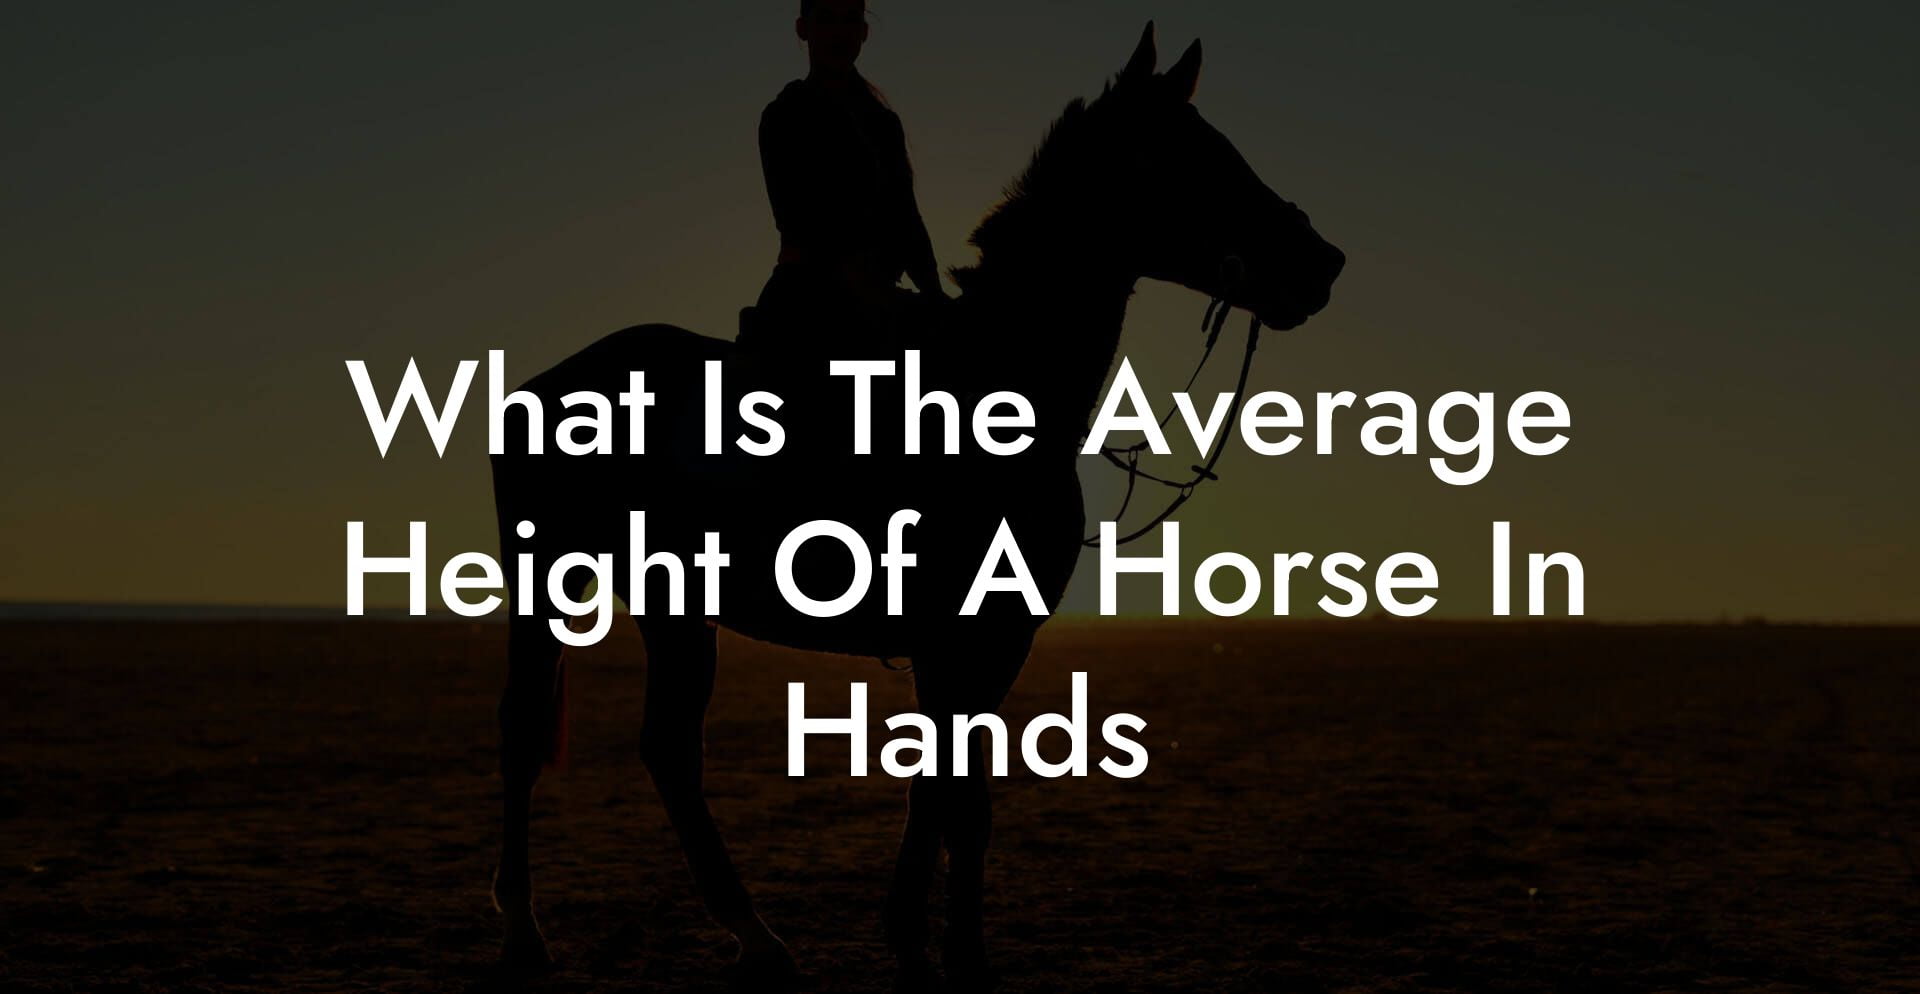 What Is The Average Height Of A Horse In Hands